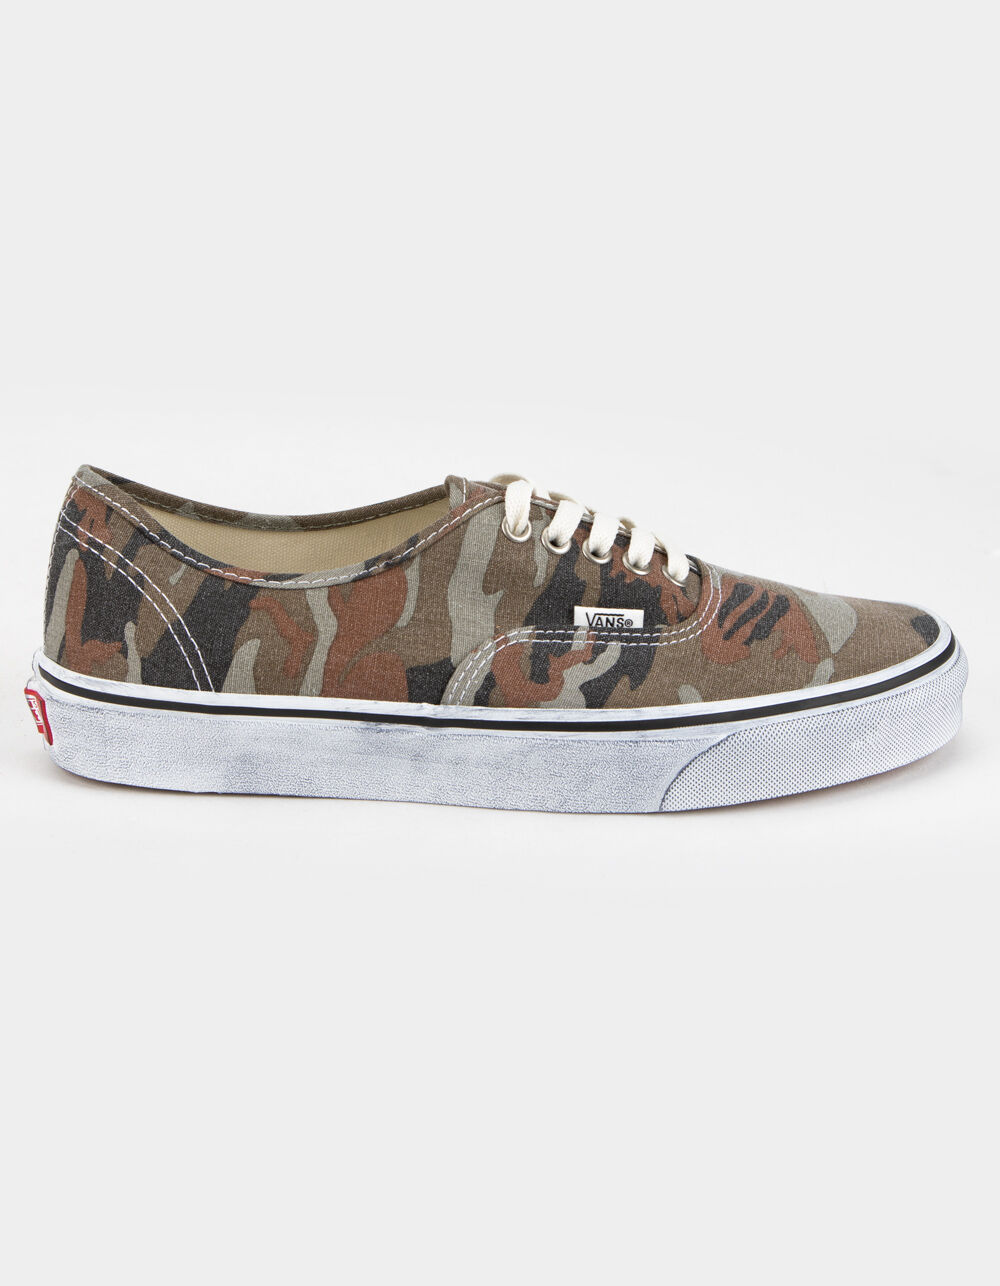 VANS Washed Camo Authentic Mens Shoes - WASHED CAMO | Tillys